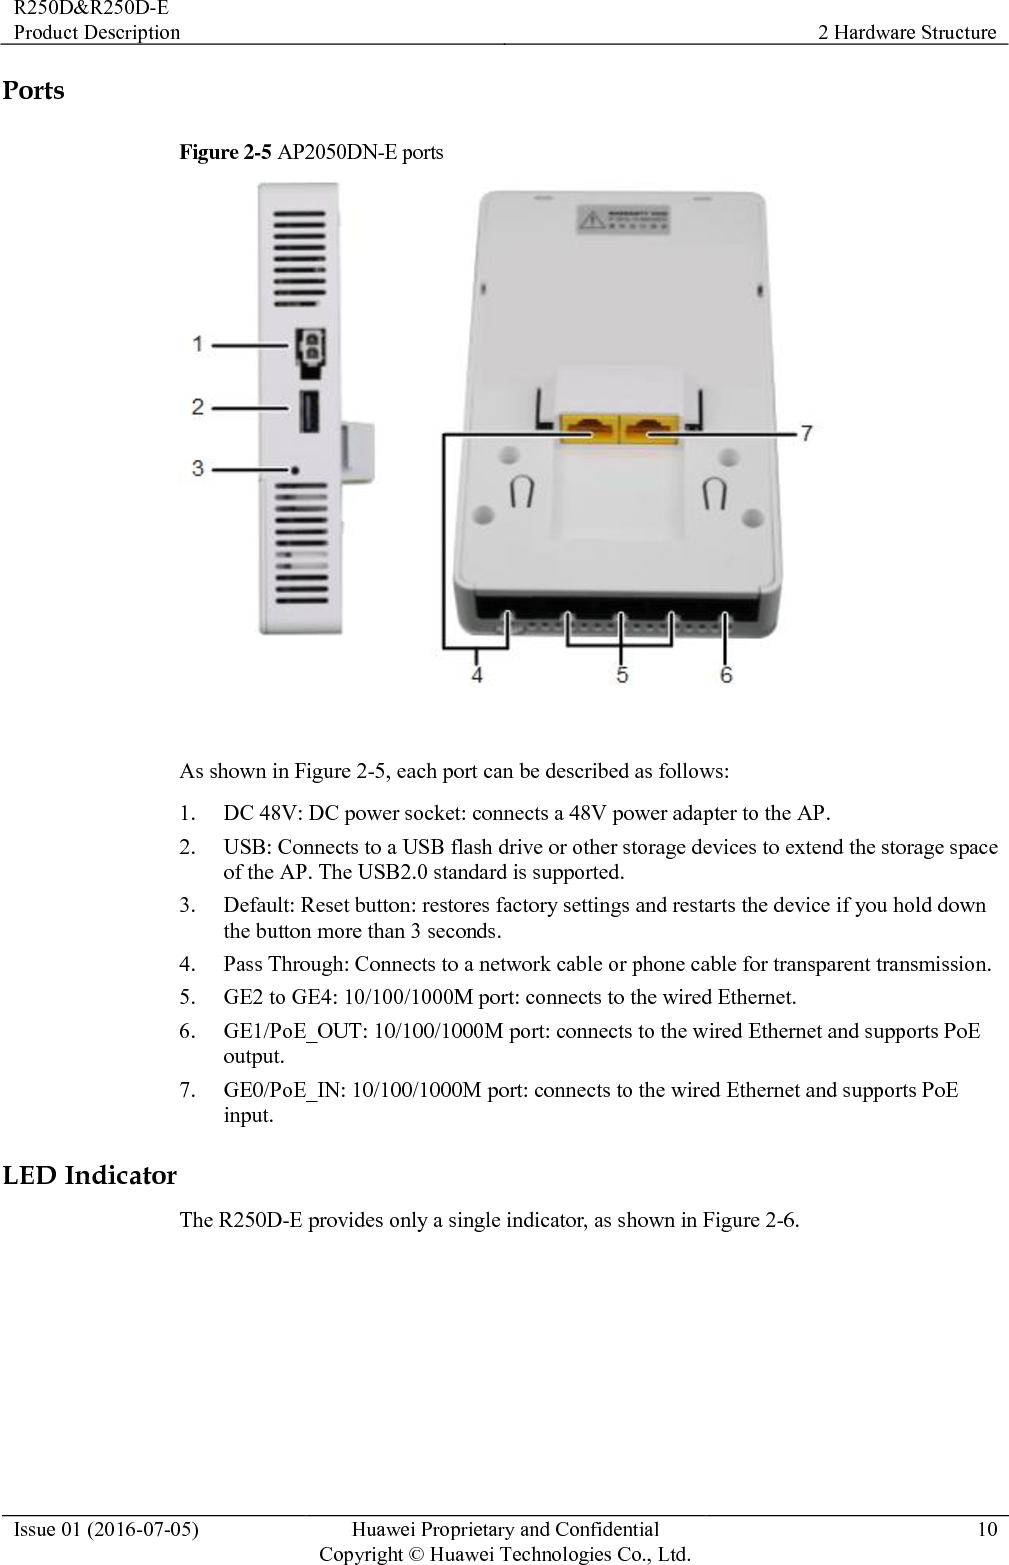 R250D&amp;R250D-E Product Description 2 Hardware Structure  Issue 01 (2016-07-05) Huawei Proprietary and Confidential                                     Copyright © Huawei Technologies Co., Ltd. 10  Ports Figure 2-5 AP2050DN-E ports   As shown in Figure 2-5, each port can be described as follows: 1. DC 48V: DC power socket: connects a 48V power adapter to the AP. 2. USB: Connects to a USB flash drive or other storage devices to extend the storage space of the AP. The USB2.0 standard is supported. 3. Default: Reset button: restores factory settings and restarts the device if you hold down the button more than 3 seconds. 4. Pass Through: Connects to a network cable or phone cable for transparent transmission. 5. GE2 to GE4: 10/100/1000M port: connects to the wired Ethernet. 6. GE1/PoE_OUT: 10/100/1000M port: connects to the wired Ethernet and supports PoE output. 7. GE0/PoE_IN: 10/100/1000M port: connects to the wired Ethernet and supports PoE input. LED Indicator The R250D-E provides only a single indicator, as shown in Figure 2-6. 